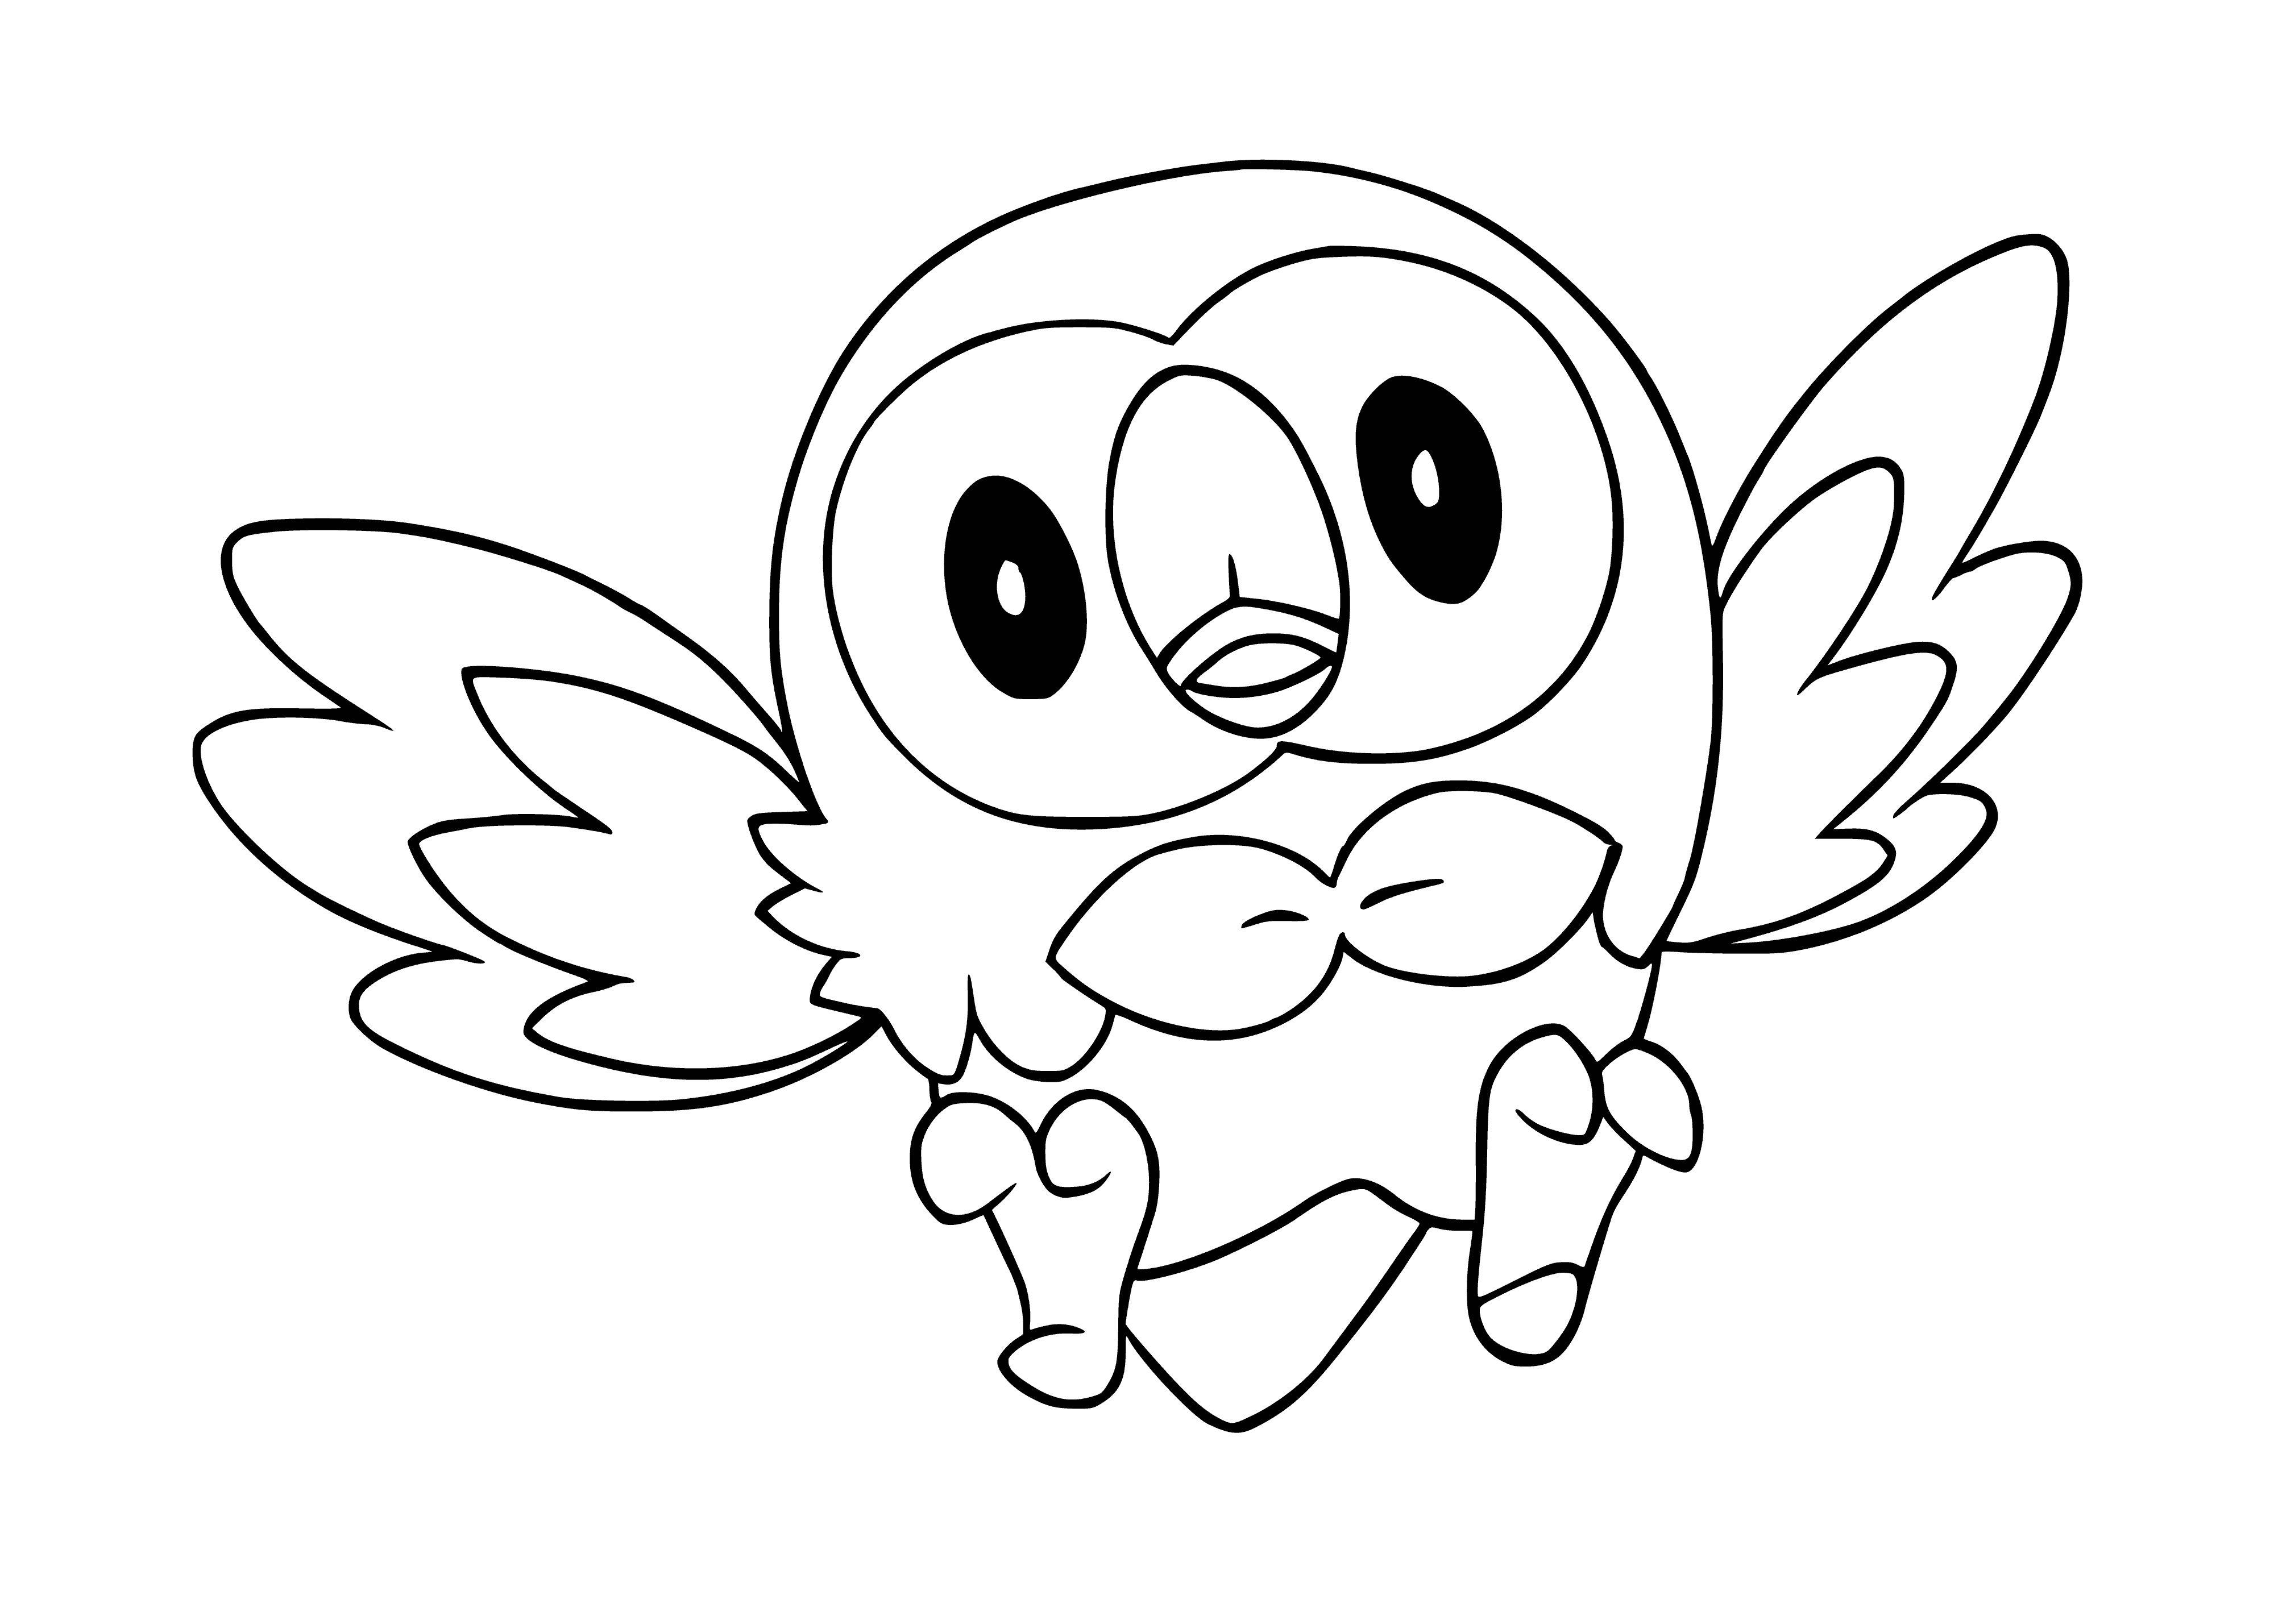 Pokemon Roulet coloring page